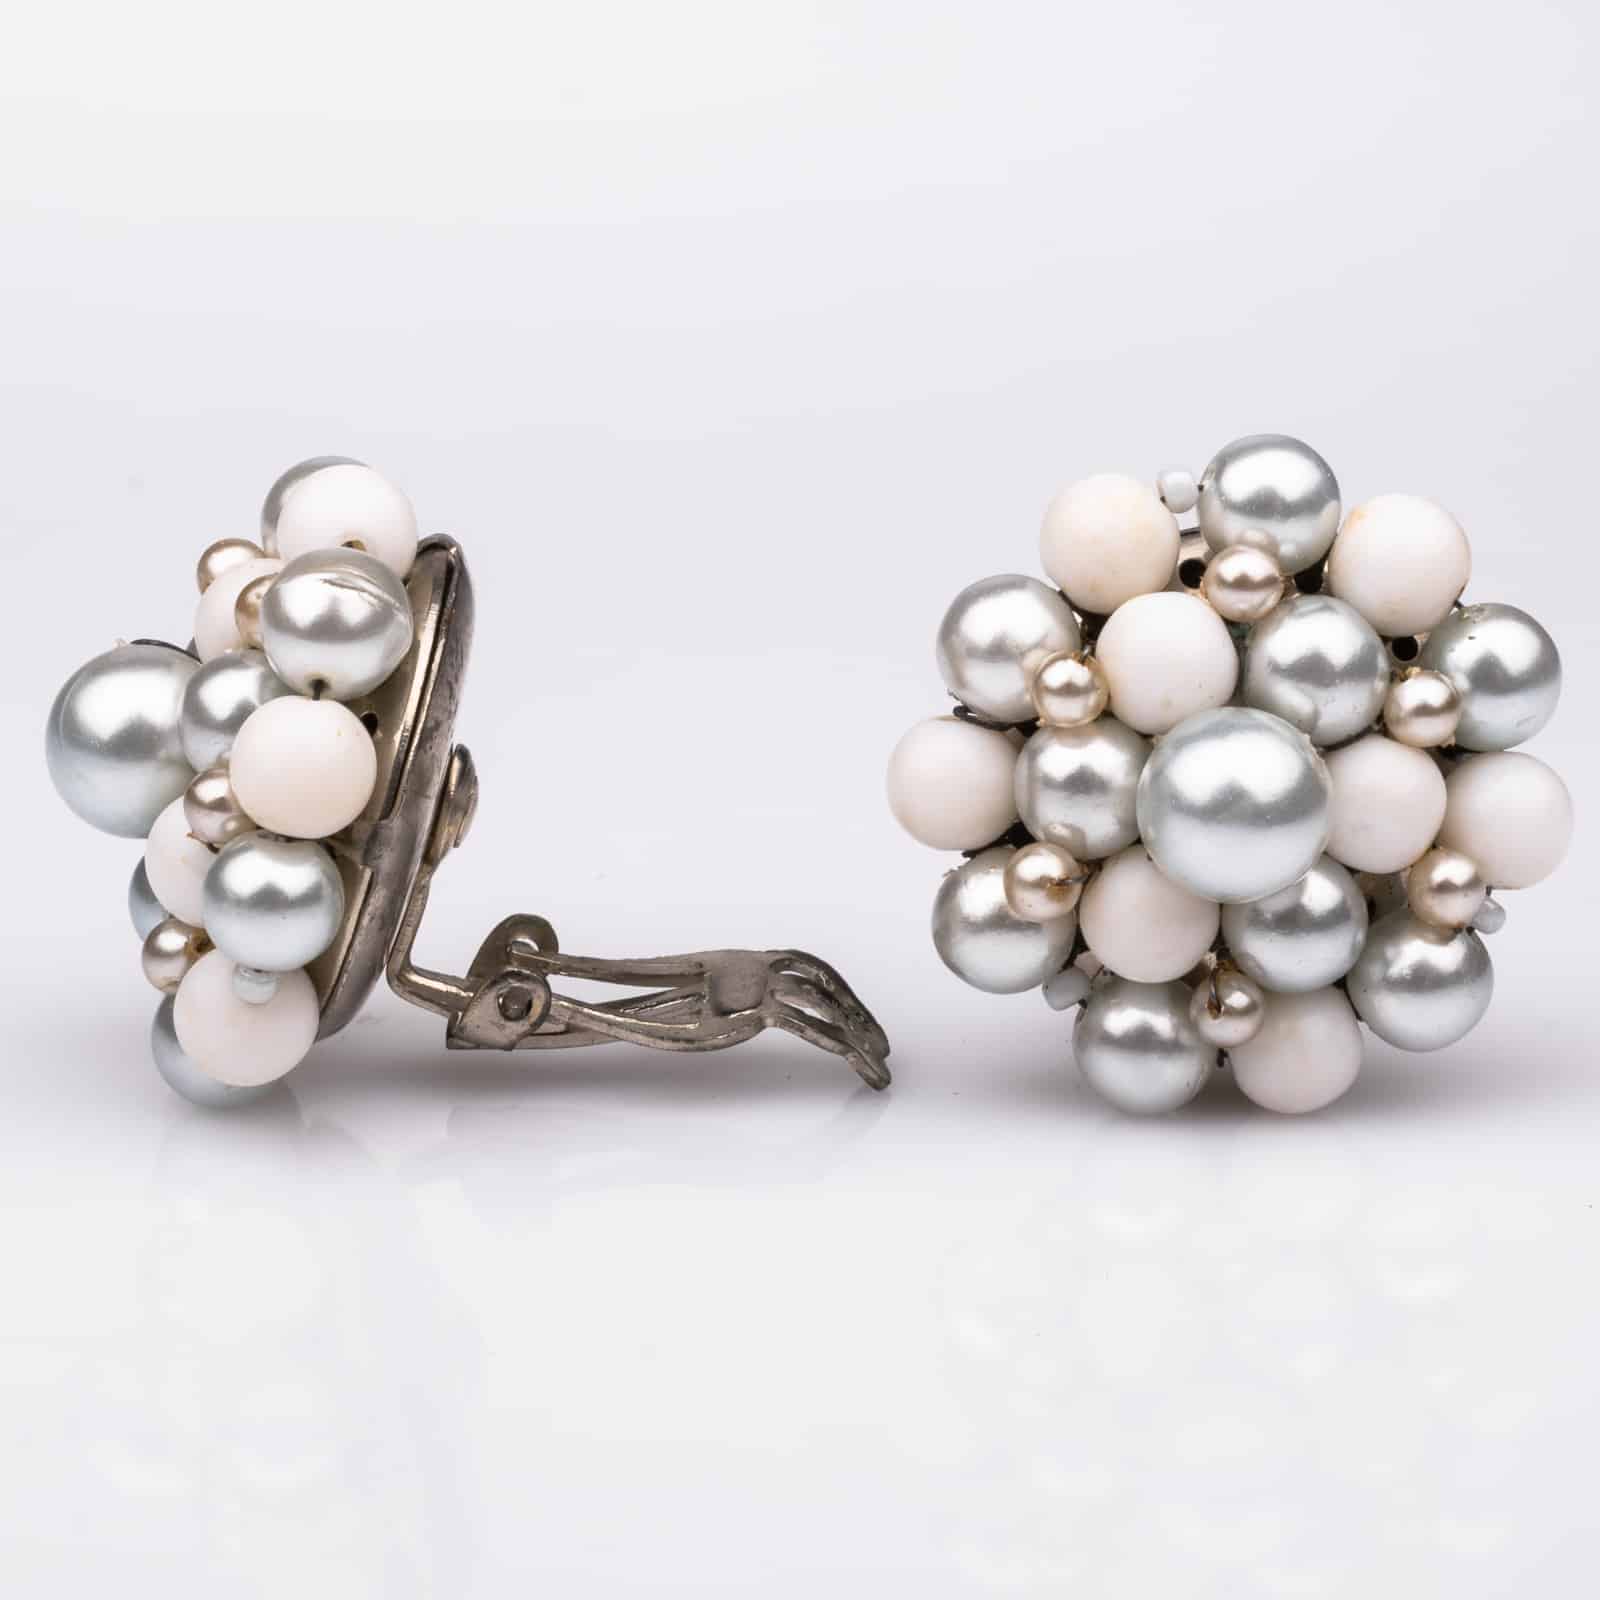 Vintage 1960s Japan Yellow Bead and Pearl Cluster Clip On Earrings 1